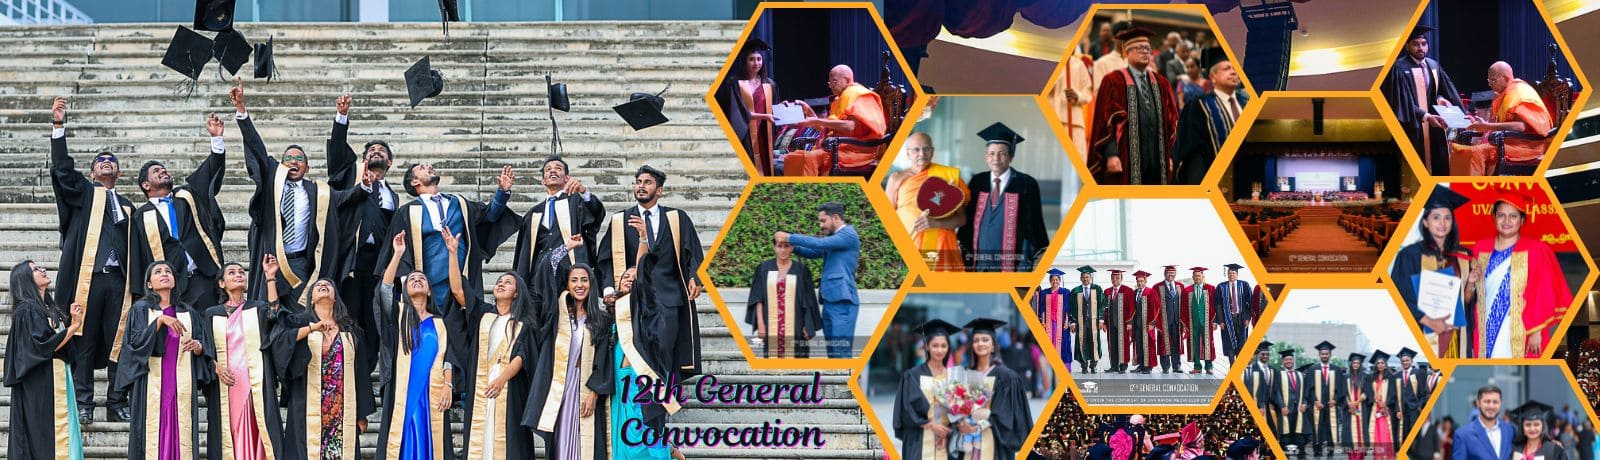 12th-General-Convocation-2-1